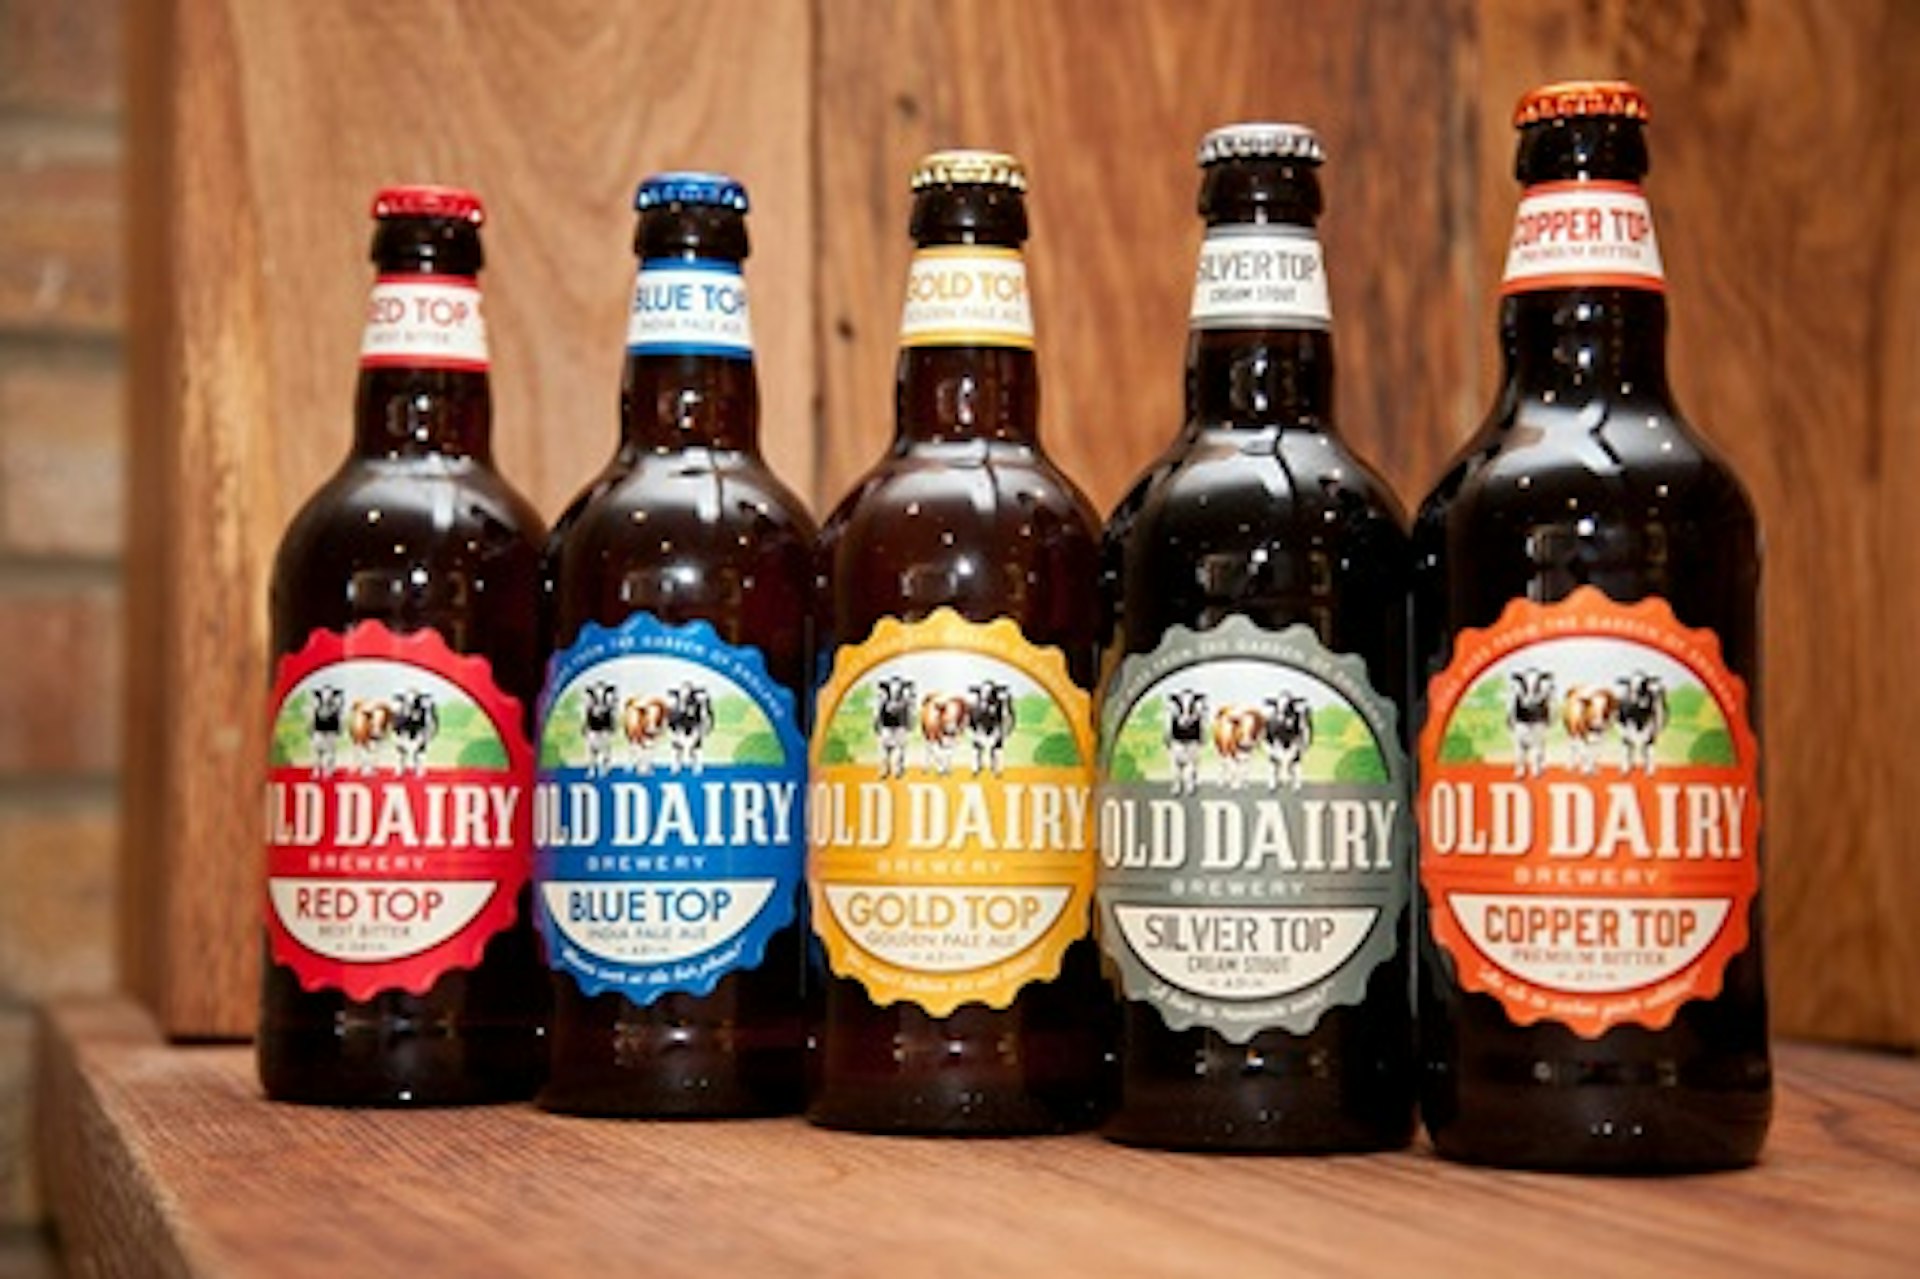 Tour and Ale Tastings for Two at The Old Dairy Brewery